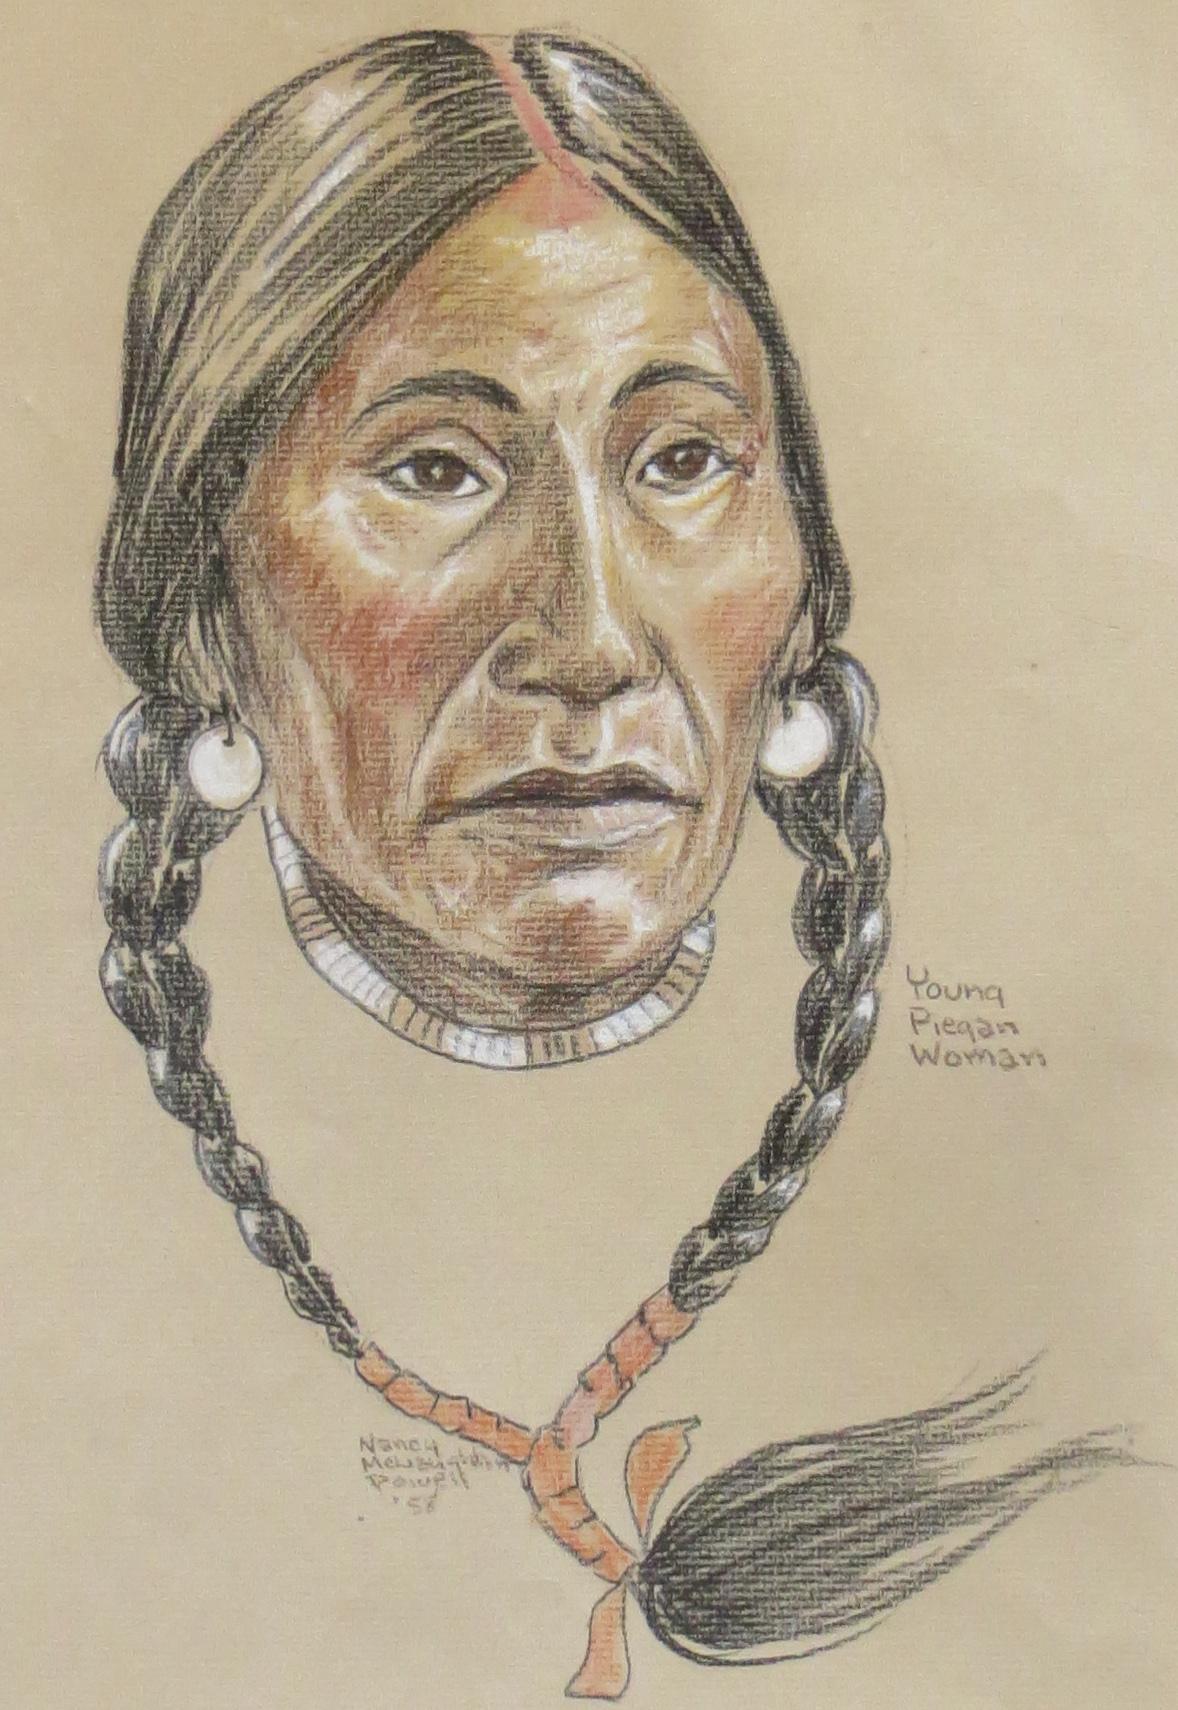 Young Piegan Woman - Painting by Nancy McLaughlin Powell